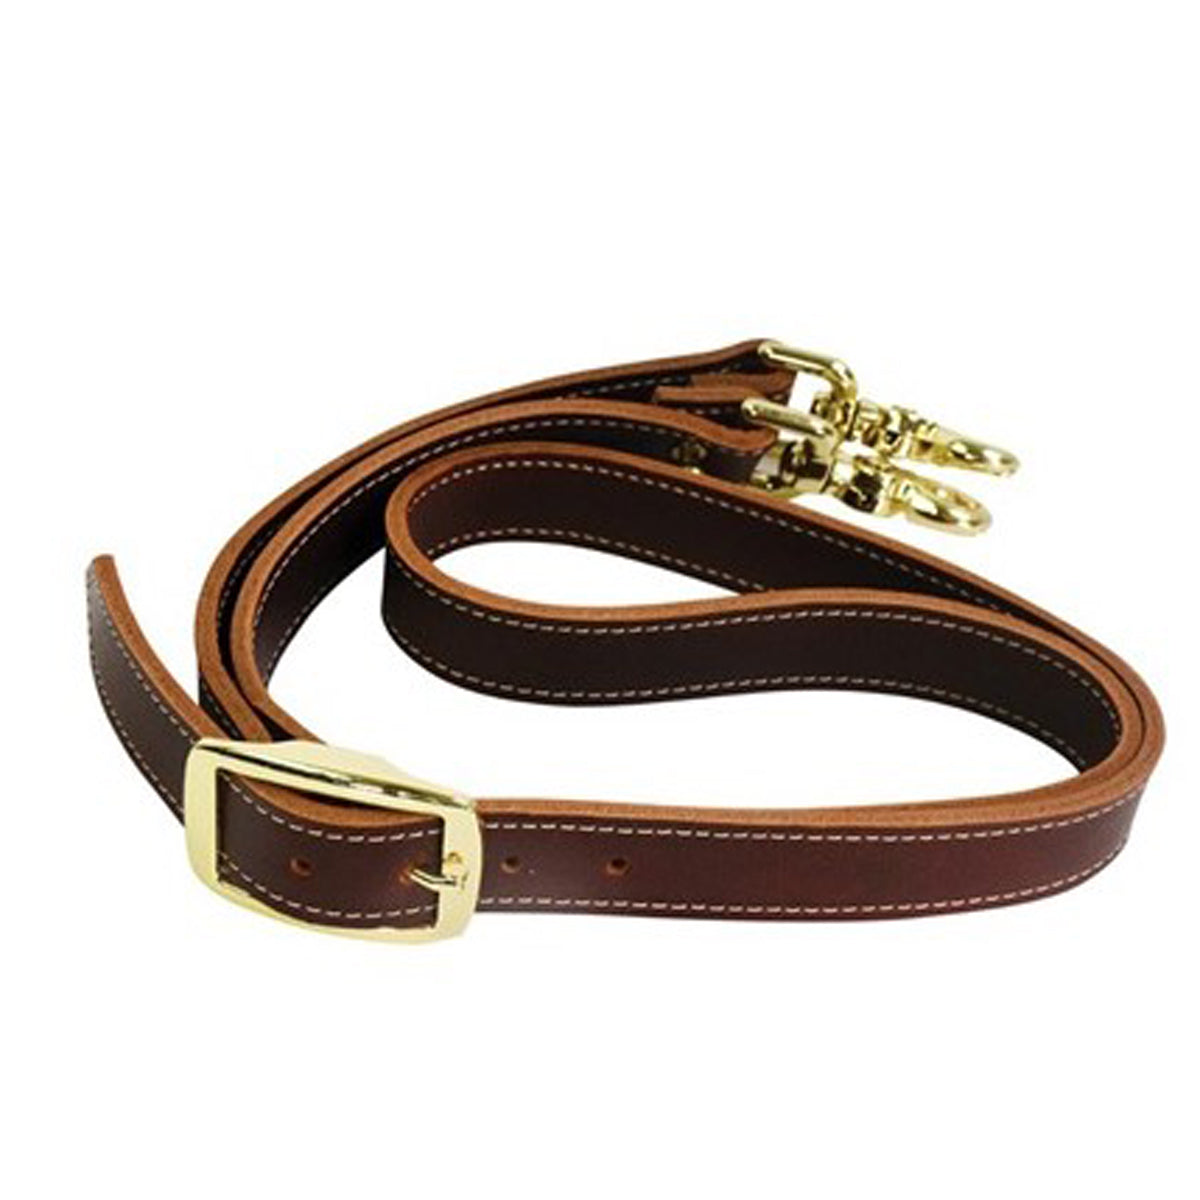 5/A Baker Leather Strap for Duffle Bag